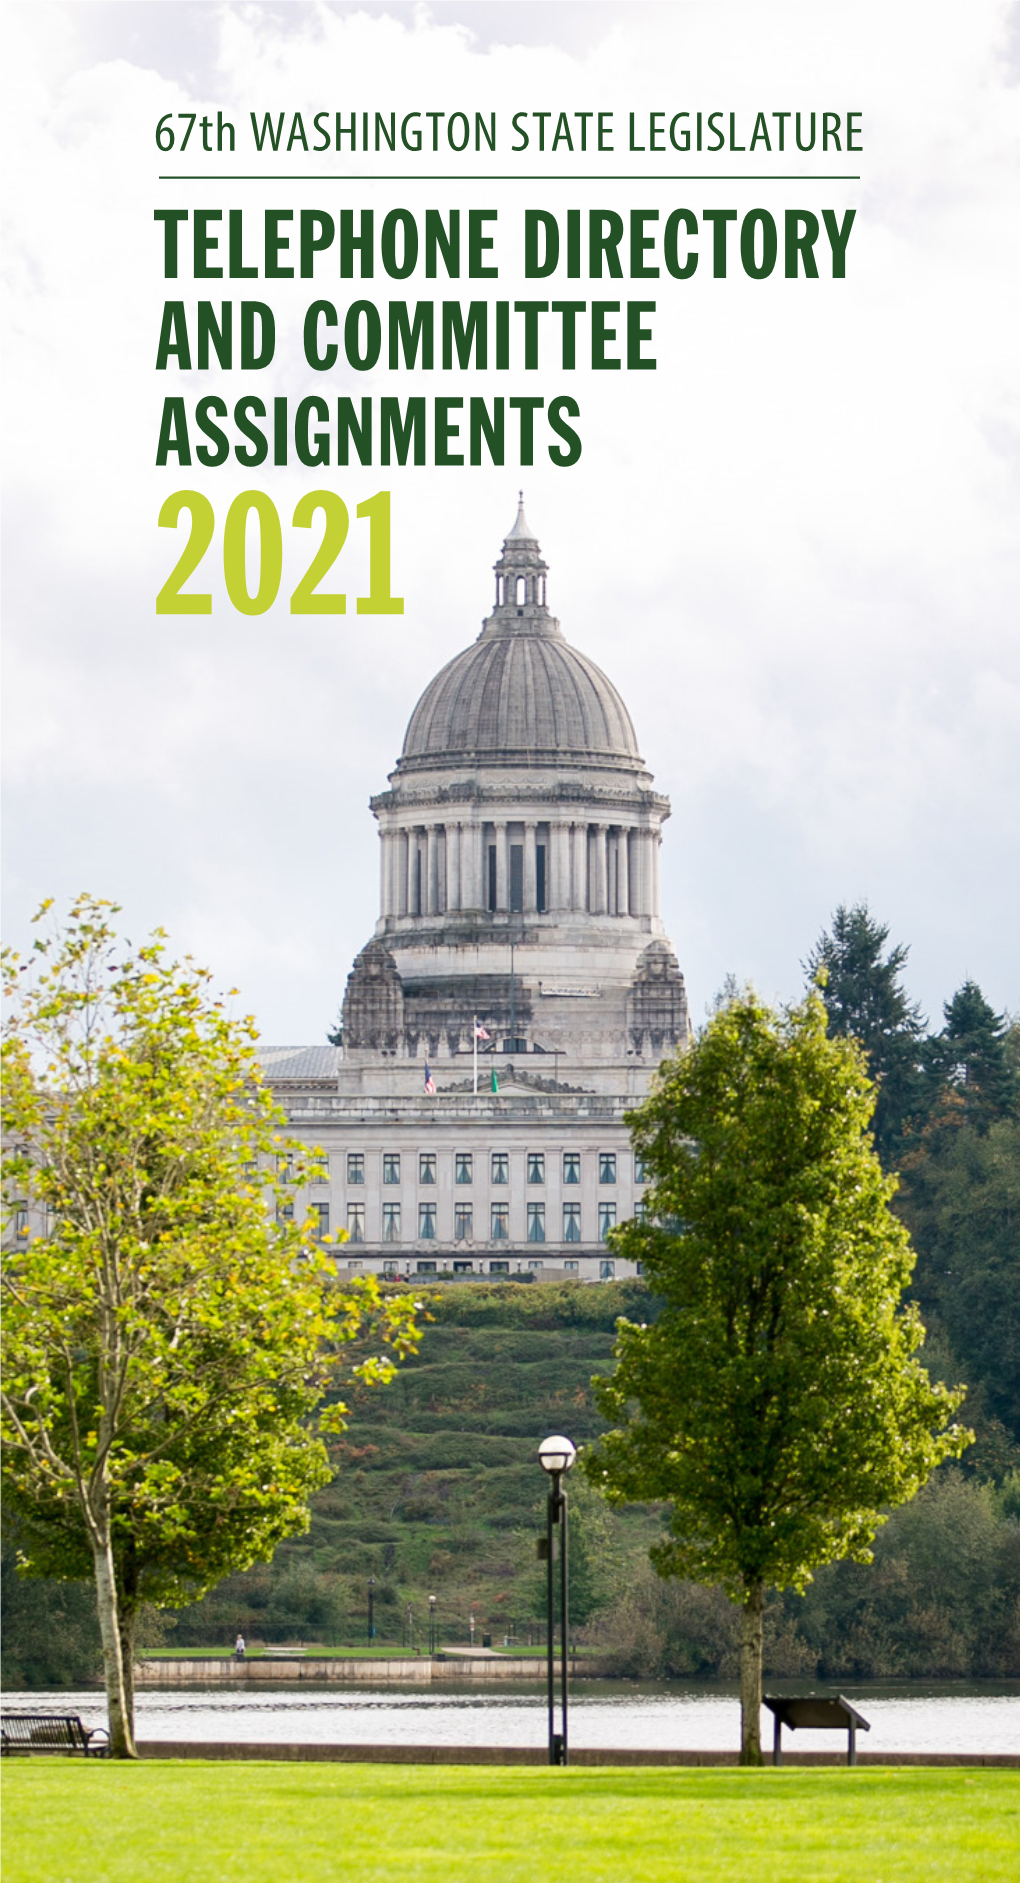 TELEPHONE DIRECTORY and COMMITTEE ASSIGNMENTS 2021 Legislative Hotline & ADA Information